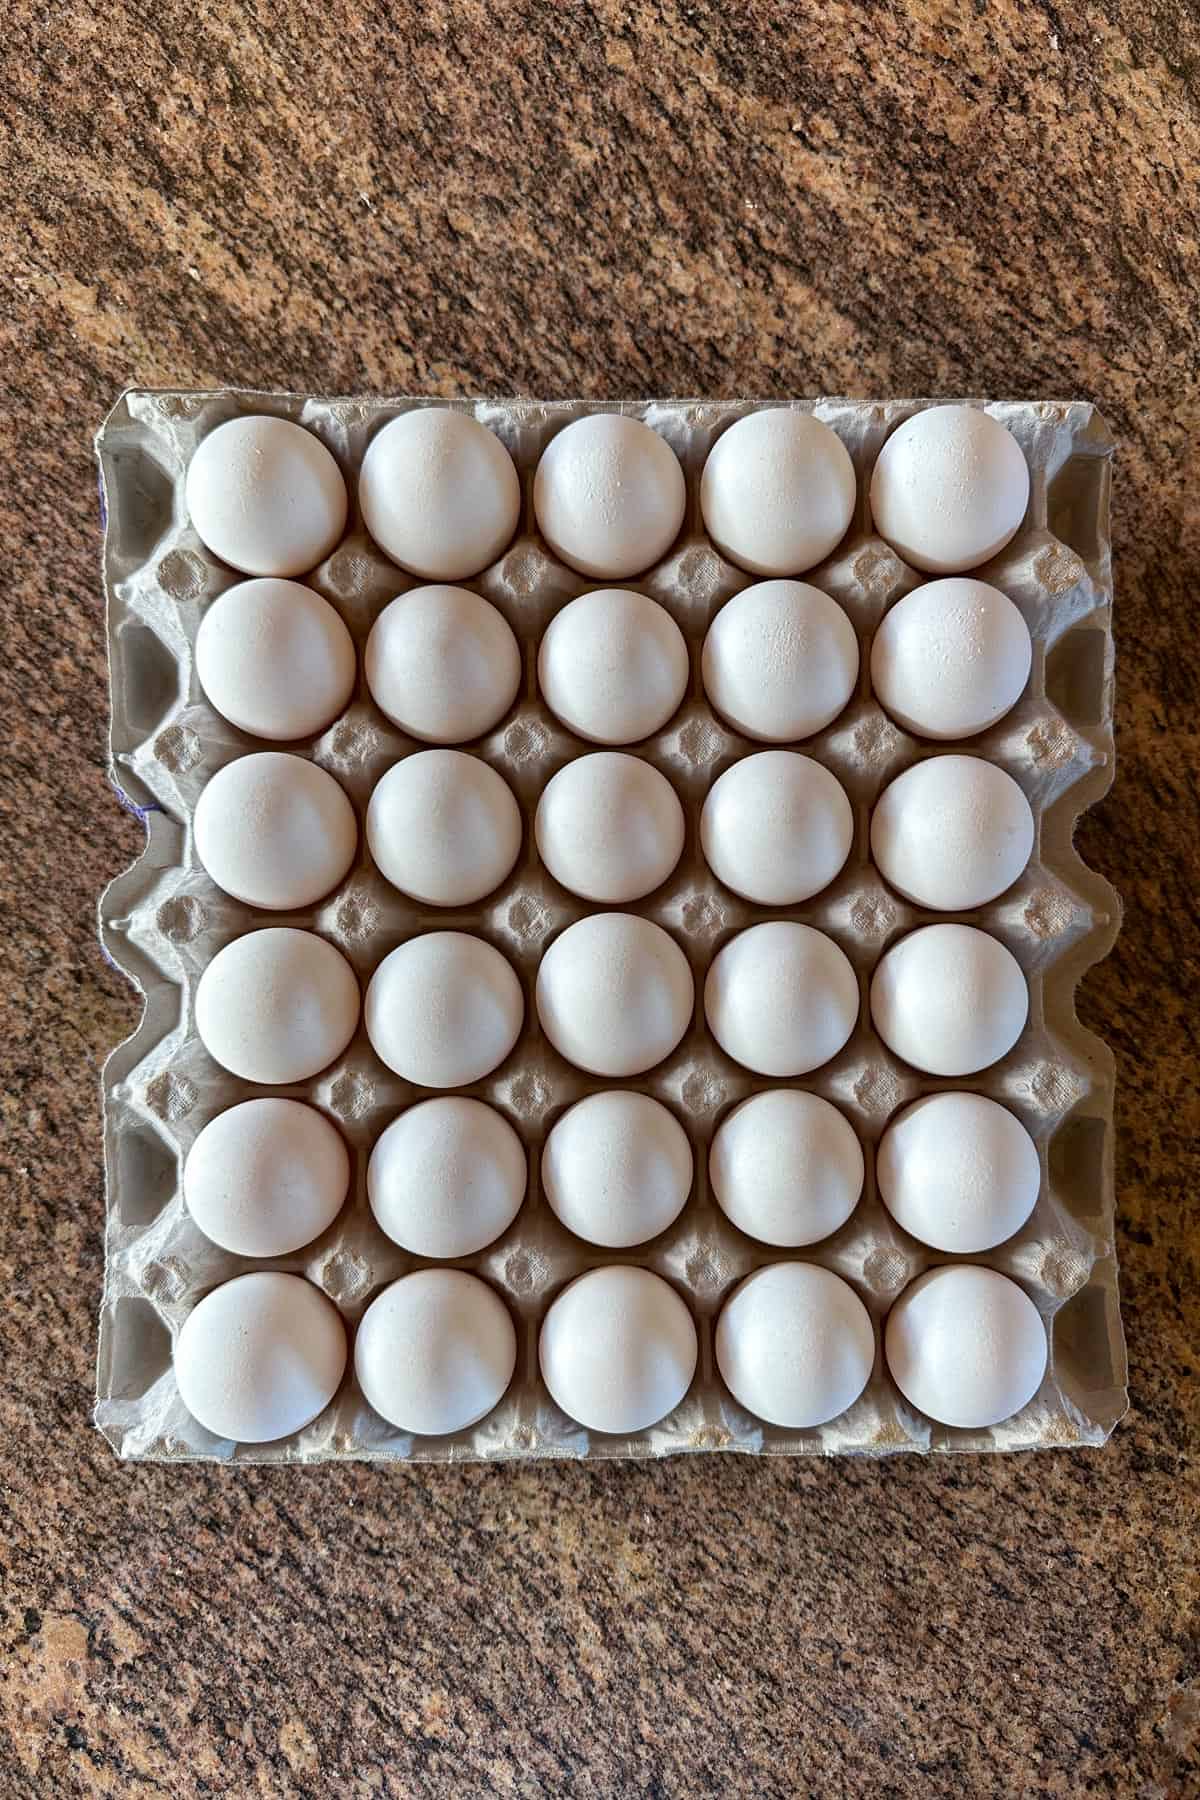 A tray of fresh eggs from OK Poultry in Hawaii.